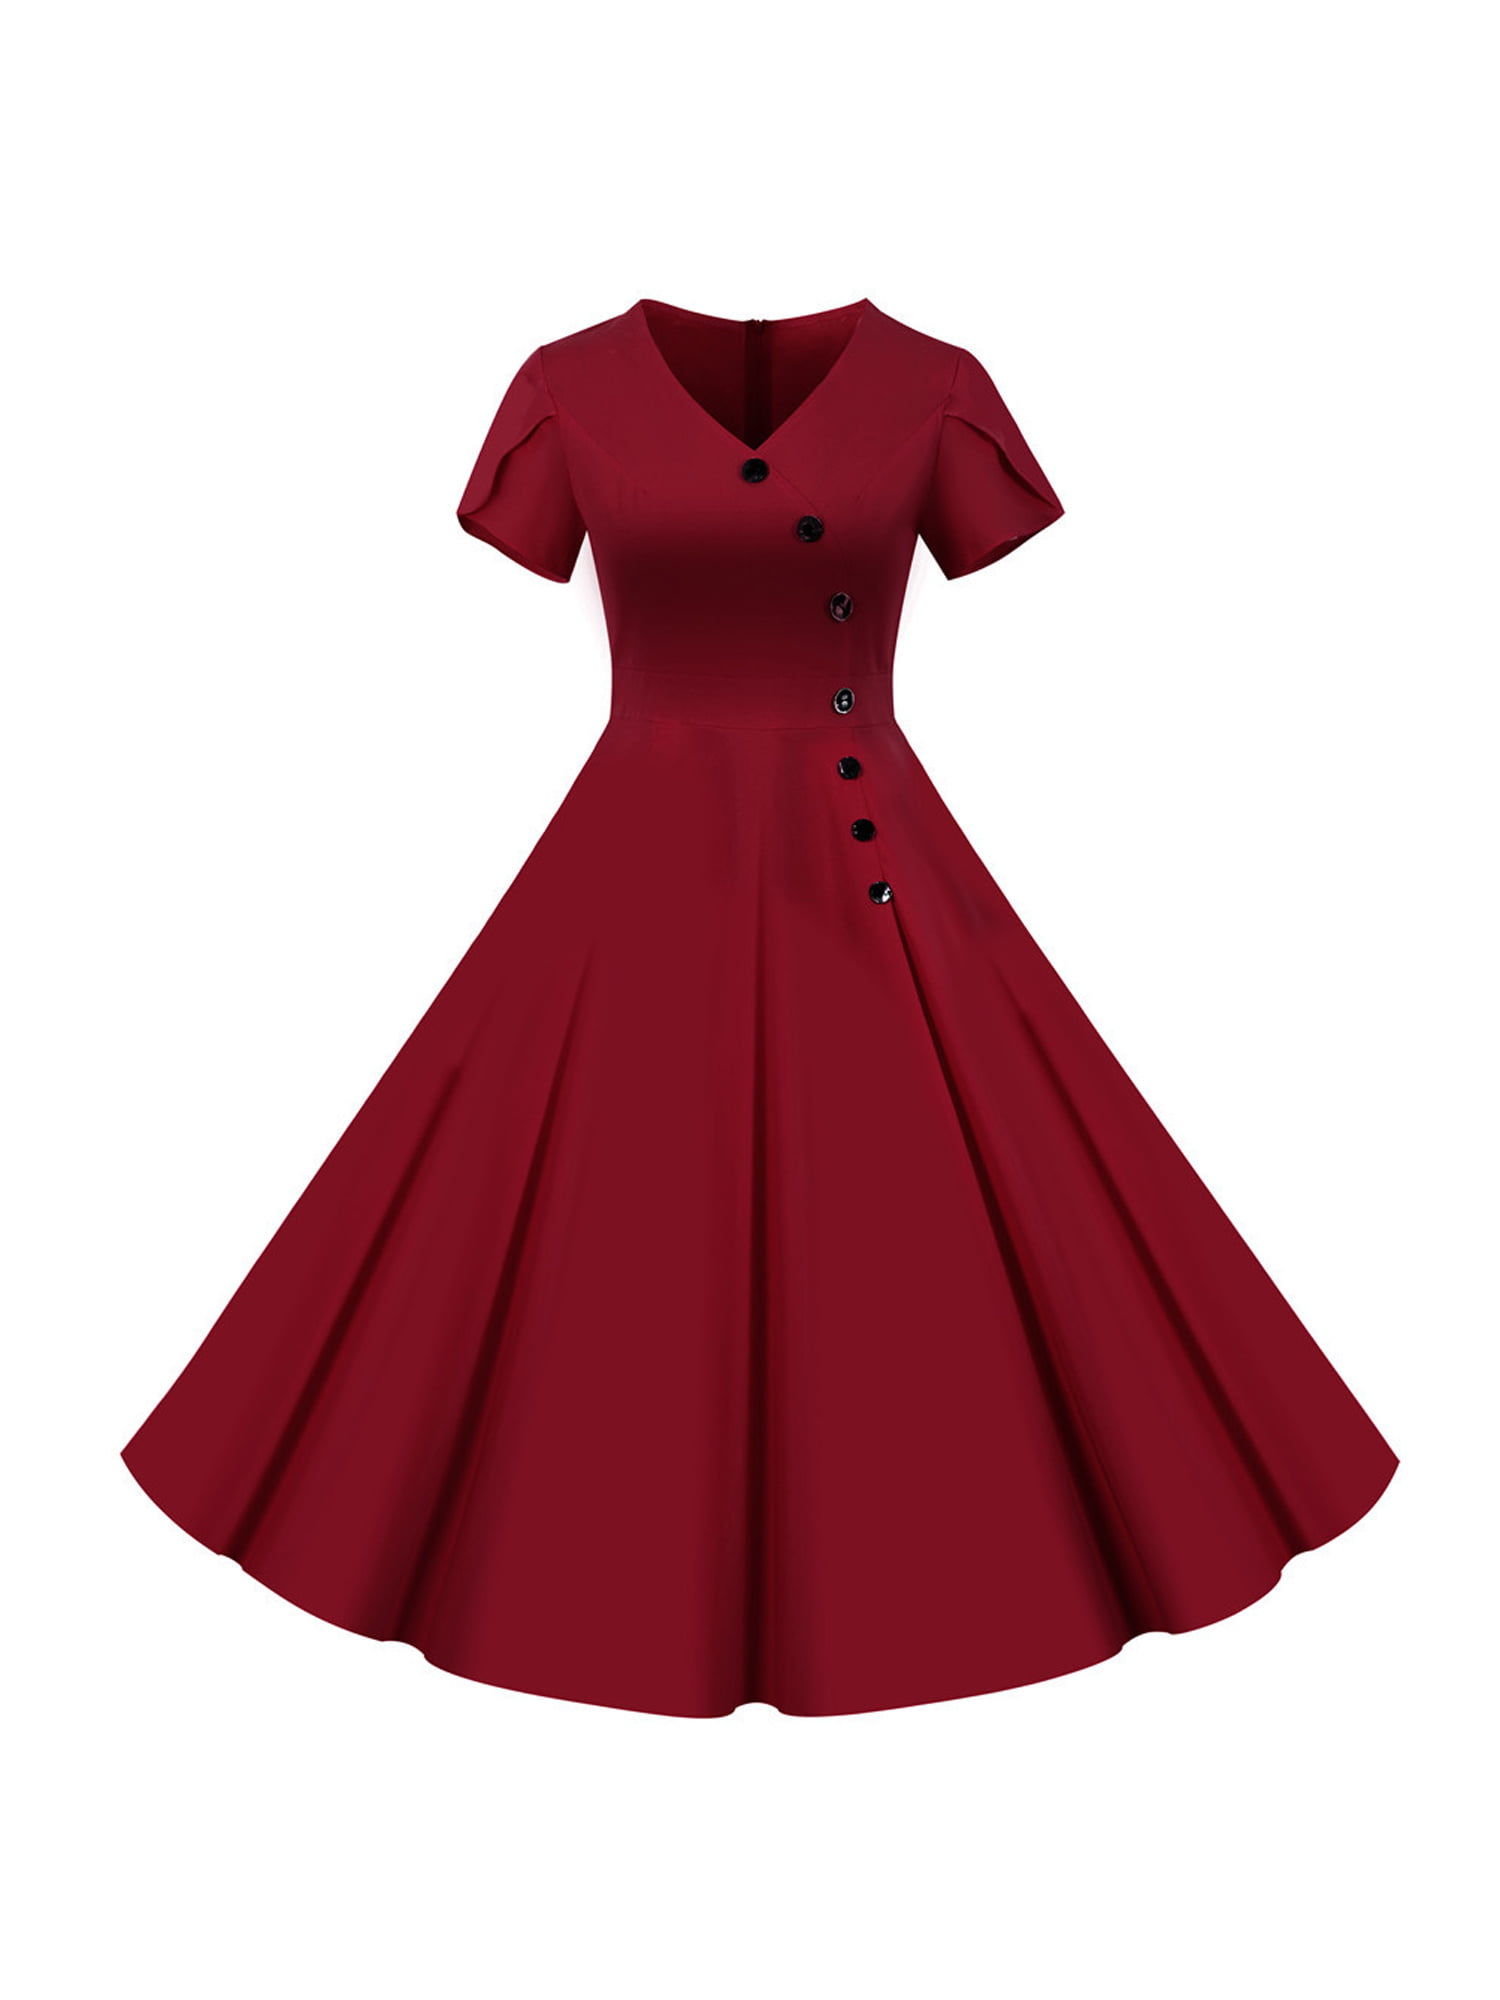 Women Vintage Rockabilly Swing Skater Dress Evening Party Cocktail Bridal Gown 